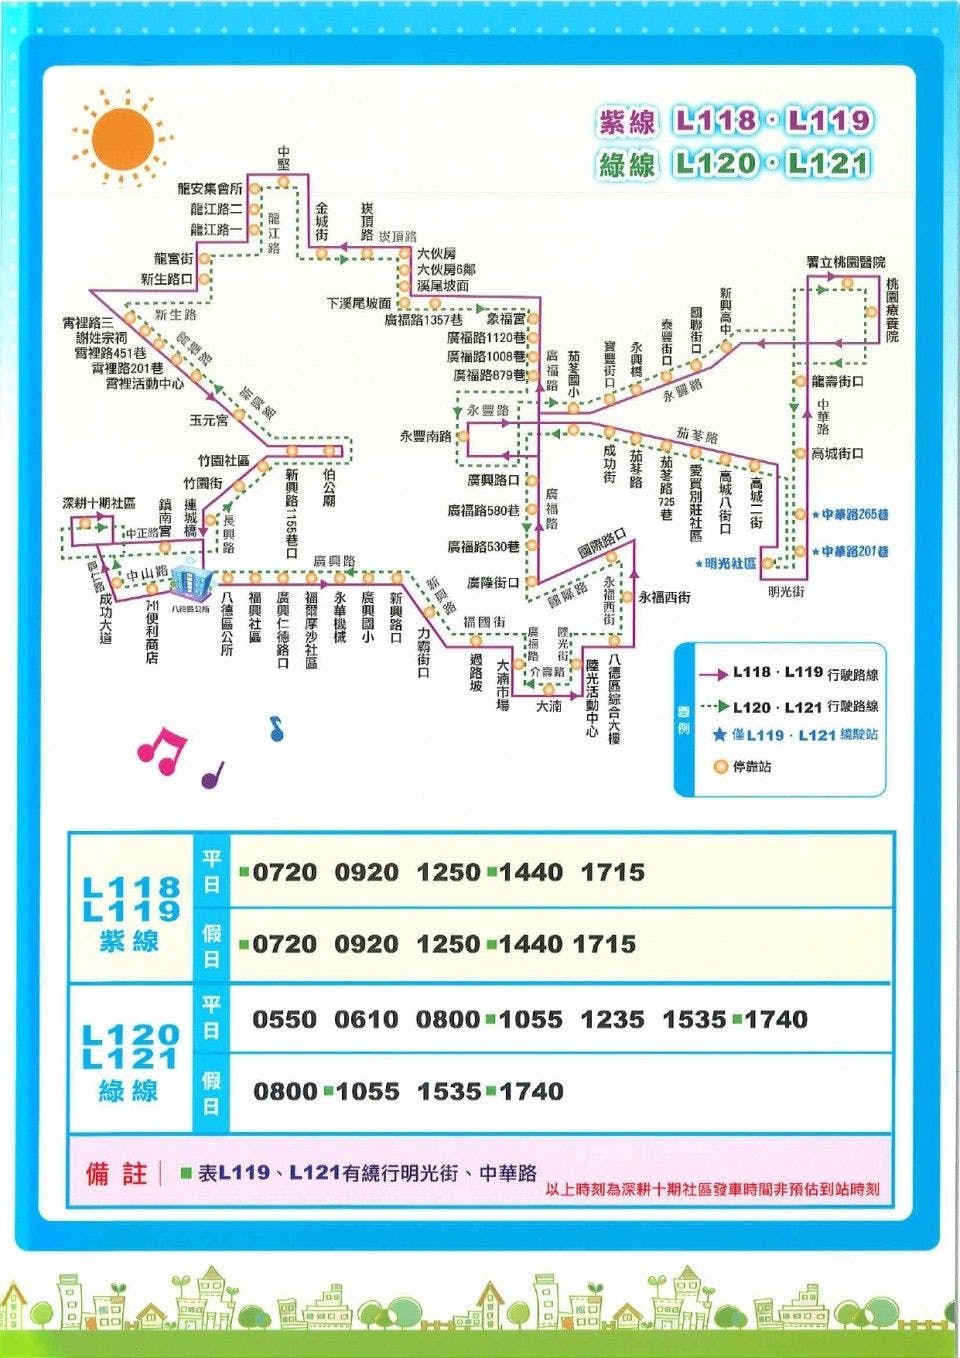 L121Route Map-桃園 Bus